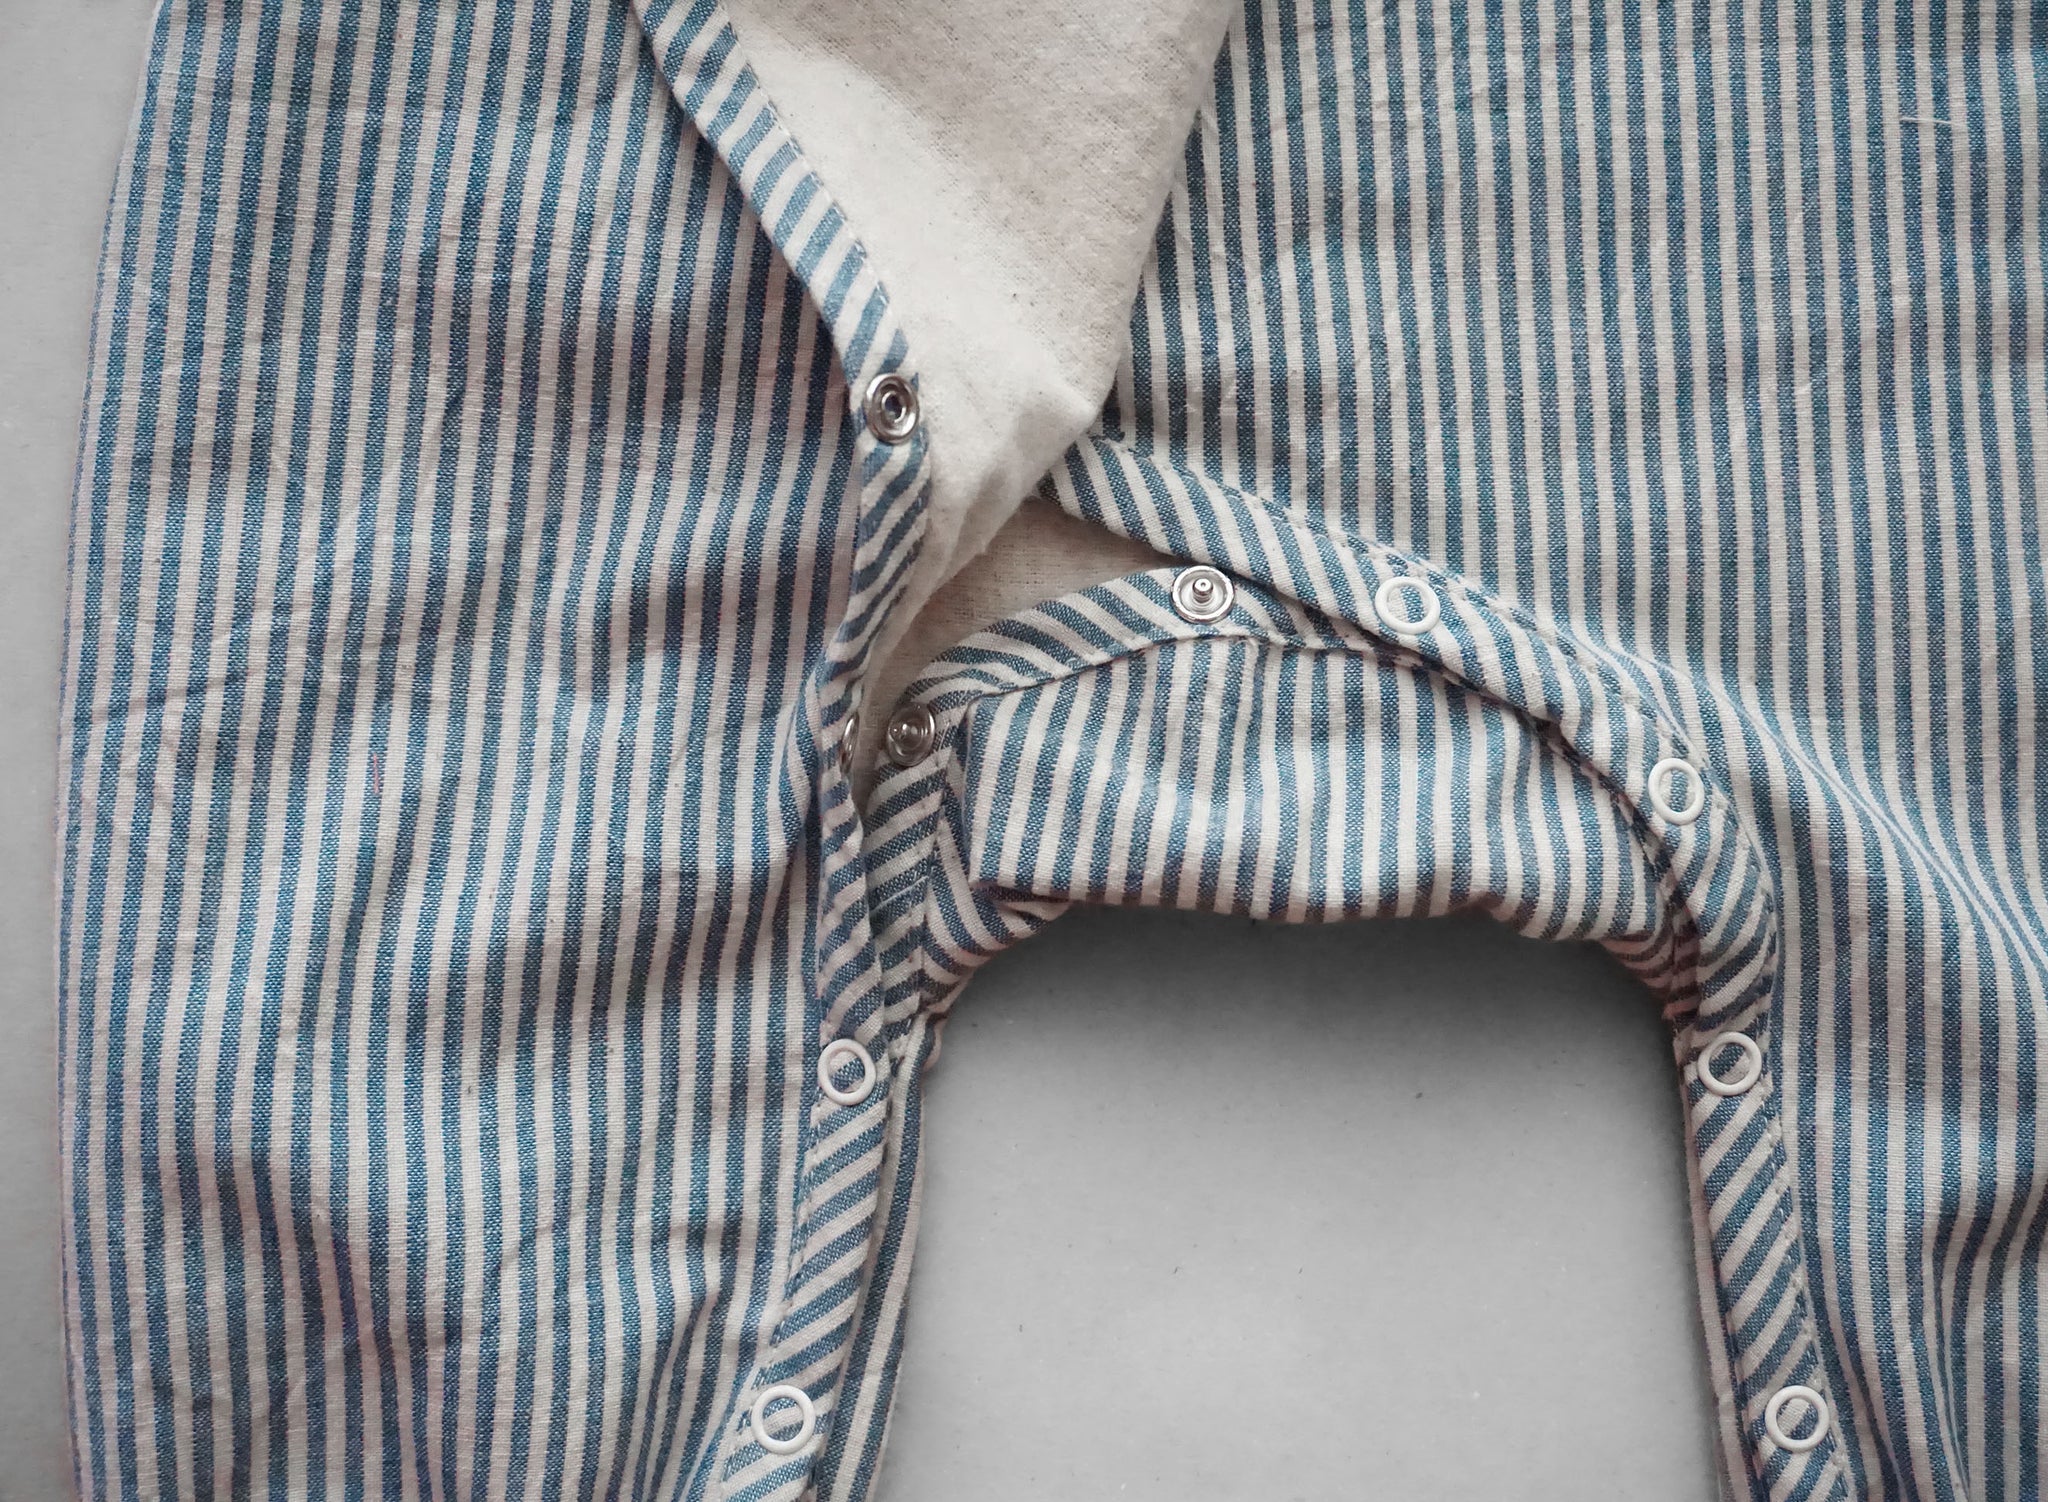 Snuggle up Winter Comfort-Suit - Blue & Off white stripes